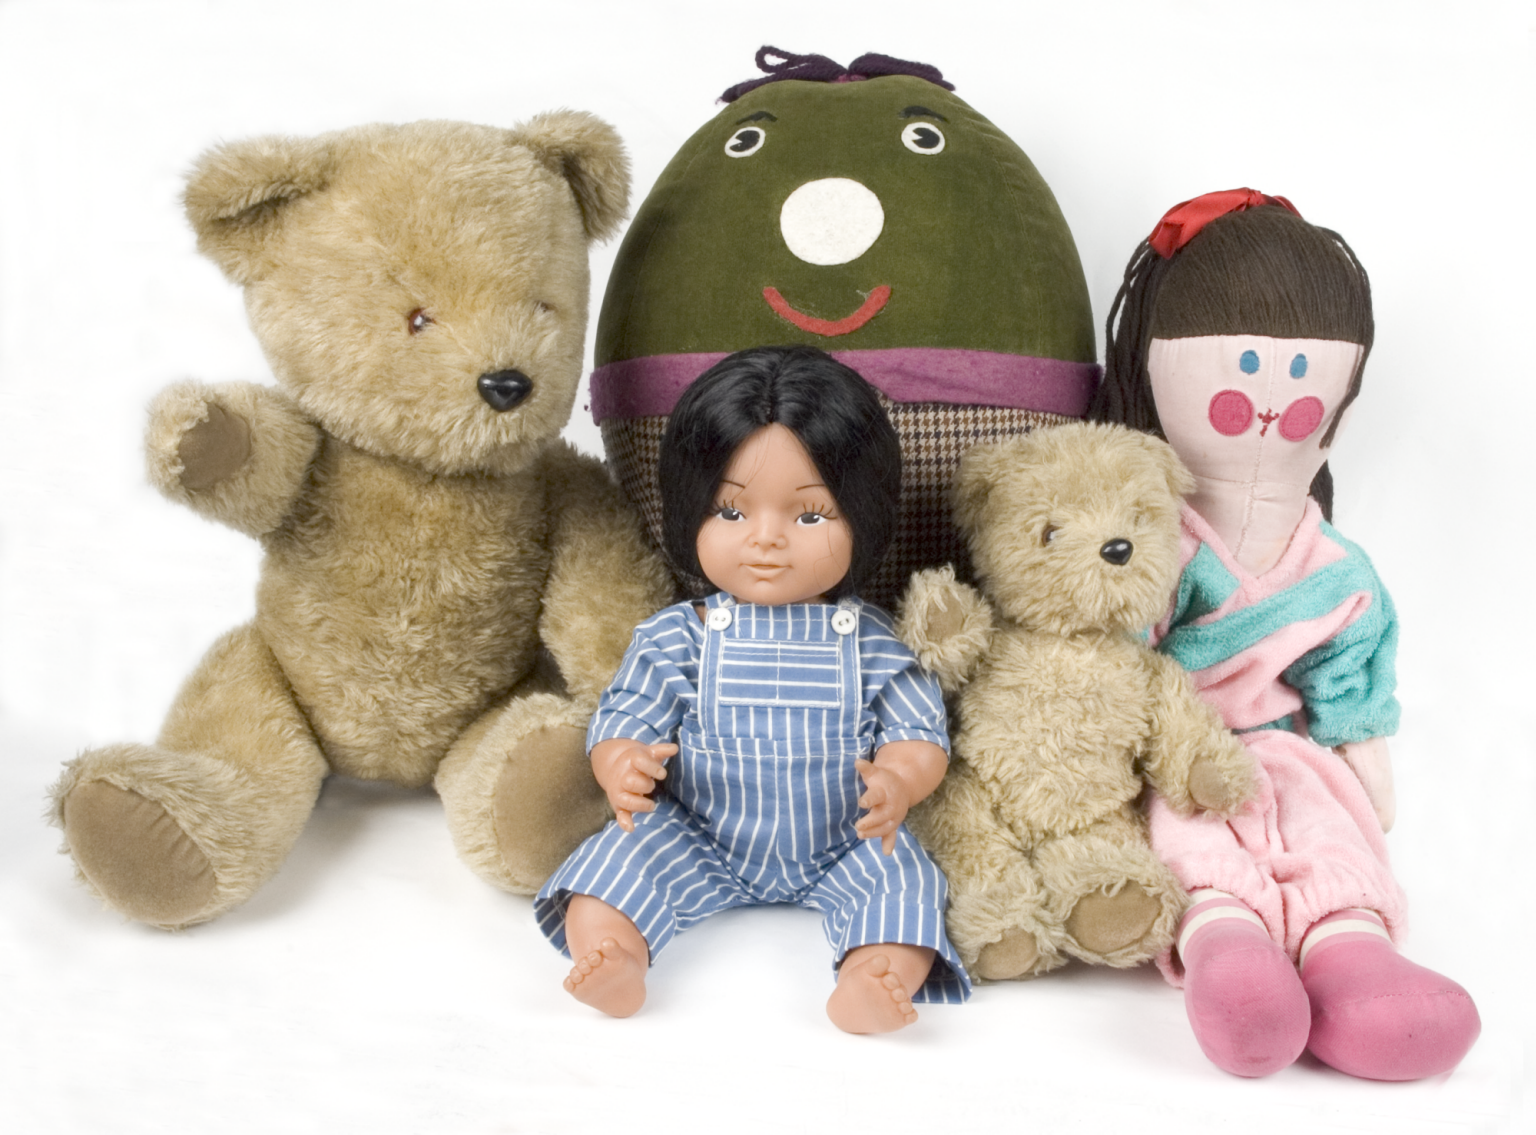 Since Play School went off air in 1988, the toys have been permanent residents in the museum’s collection.